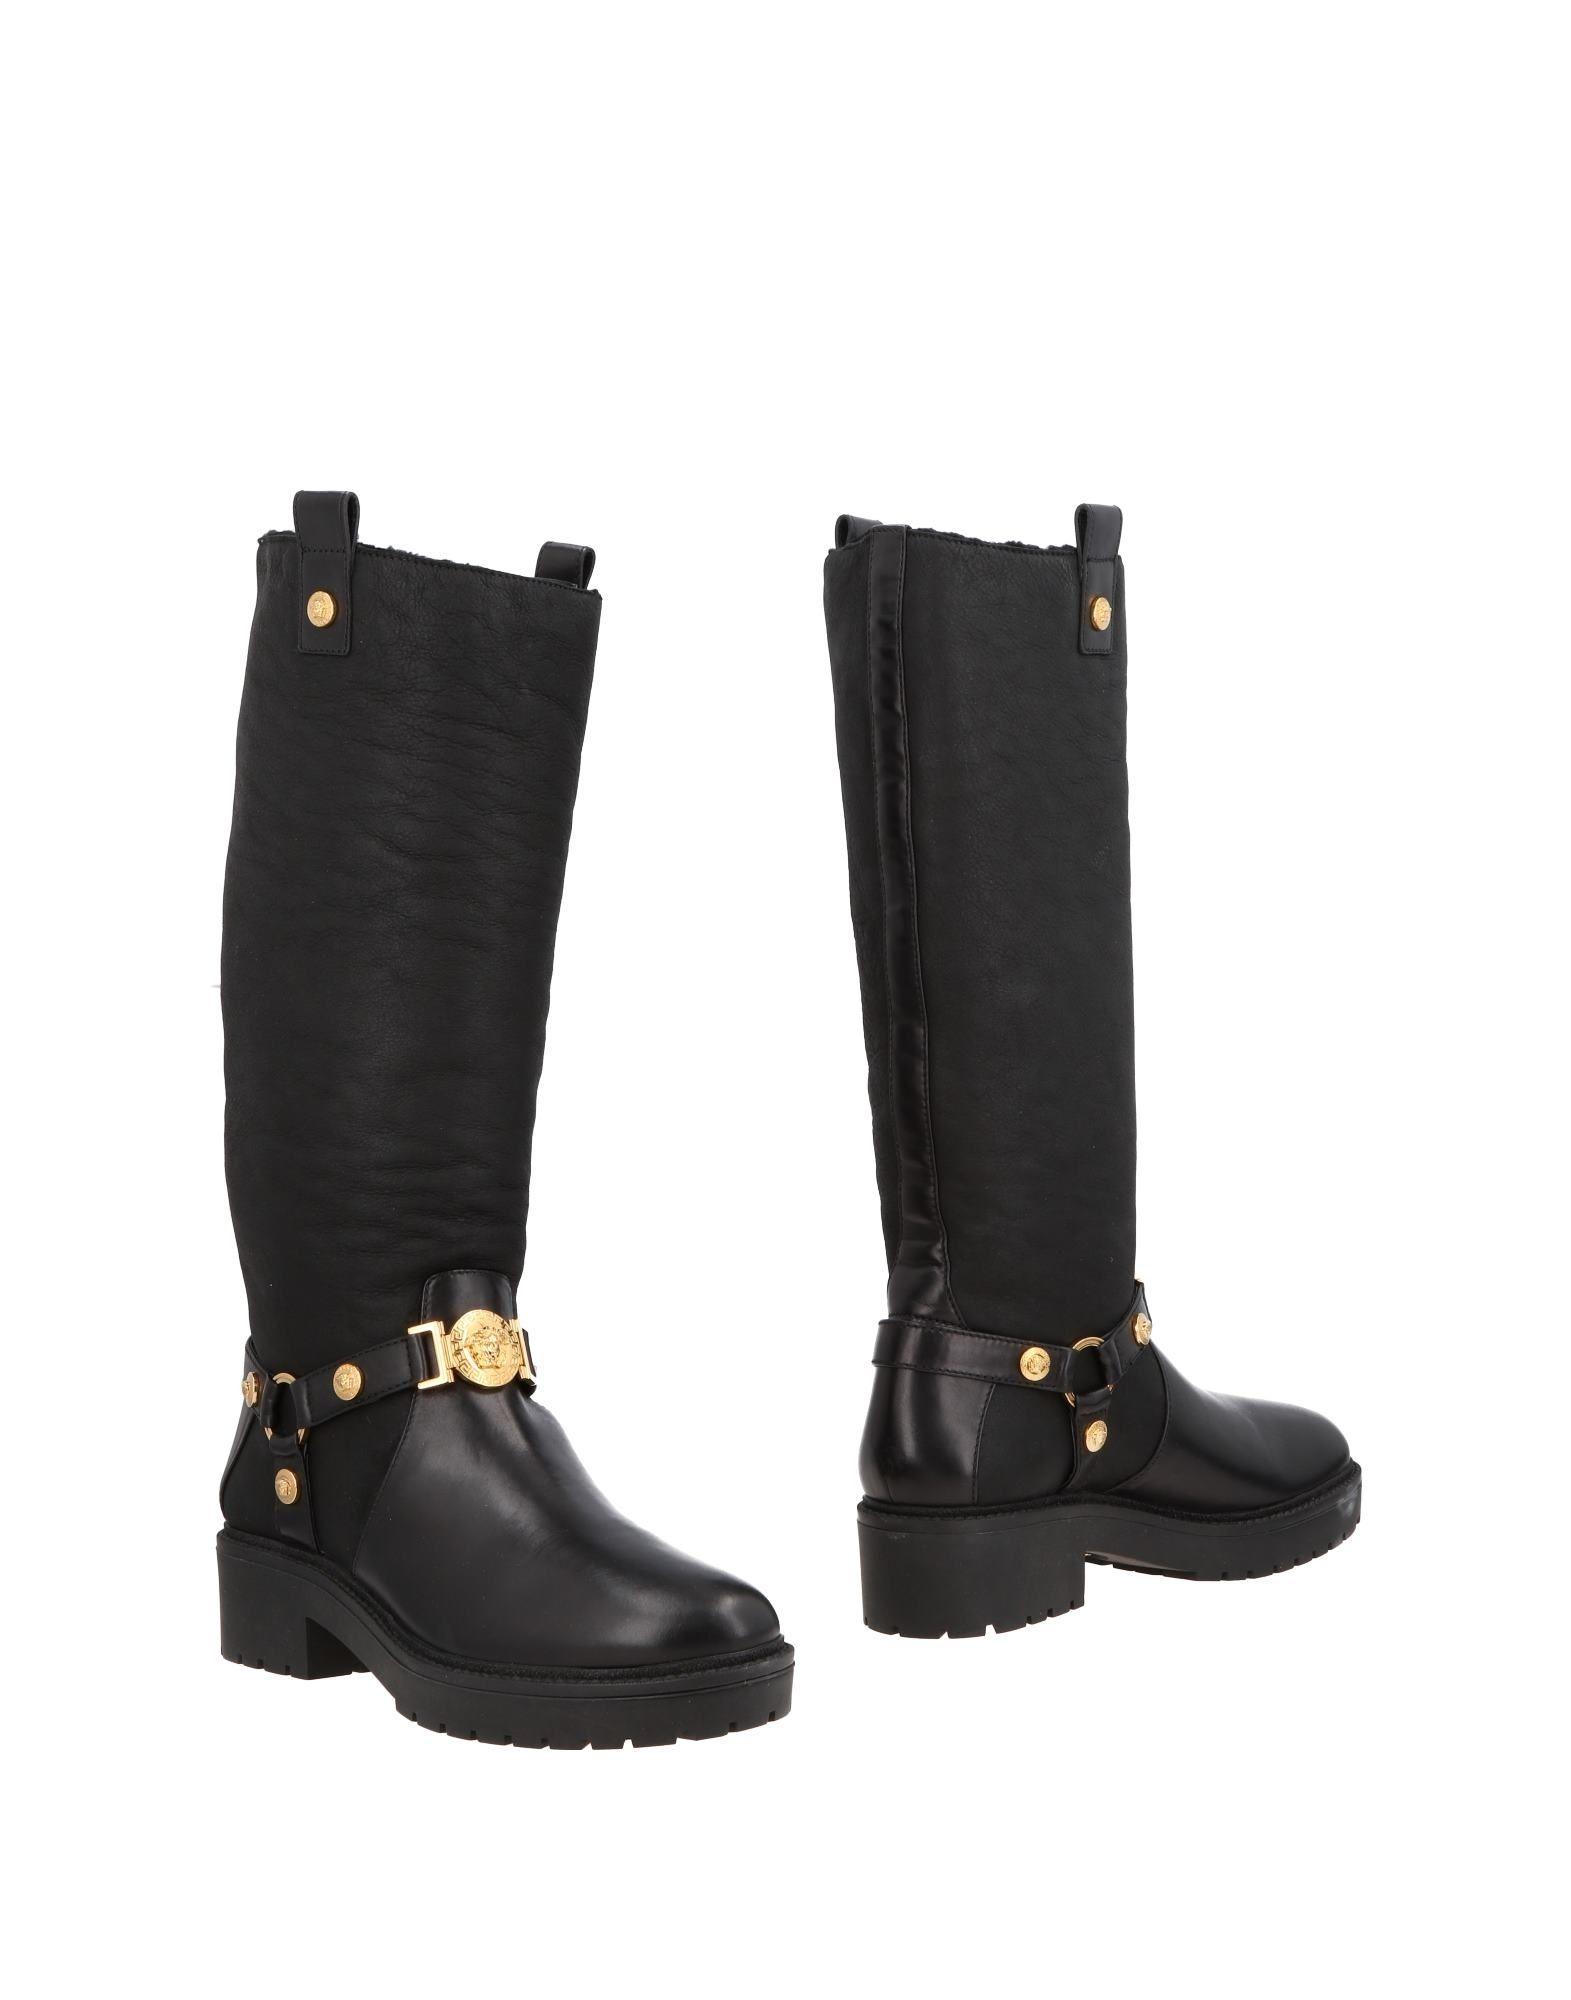 versace boots sale off 55% - www 